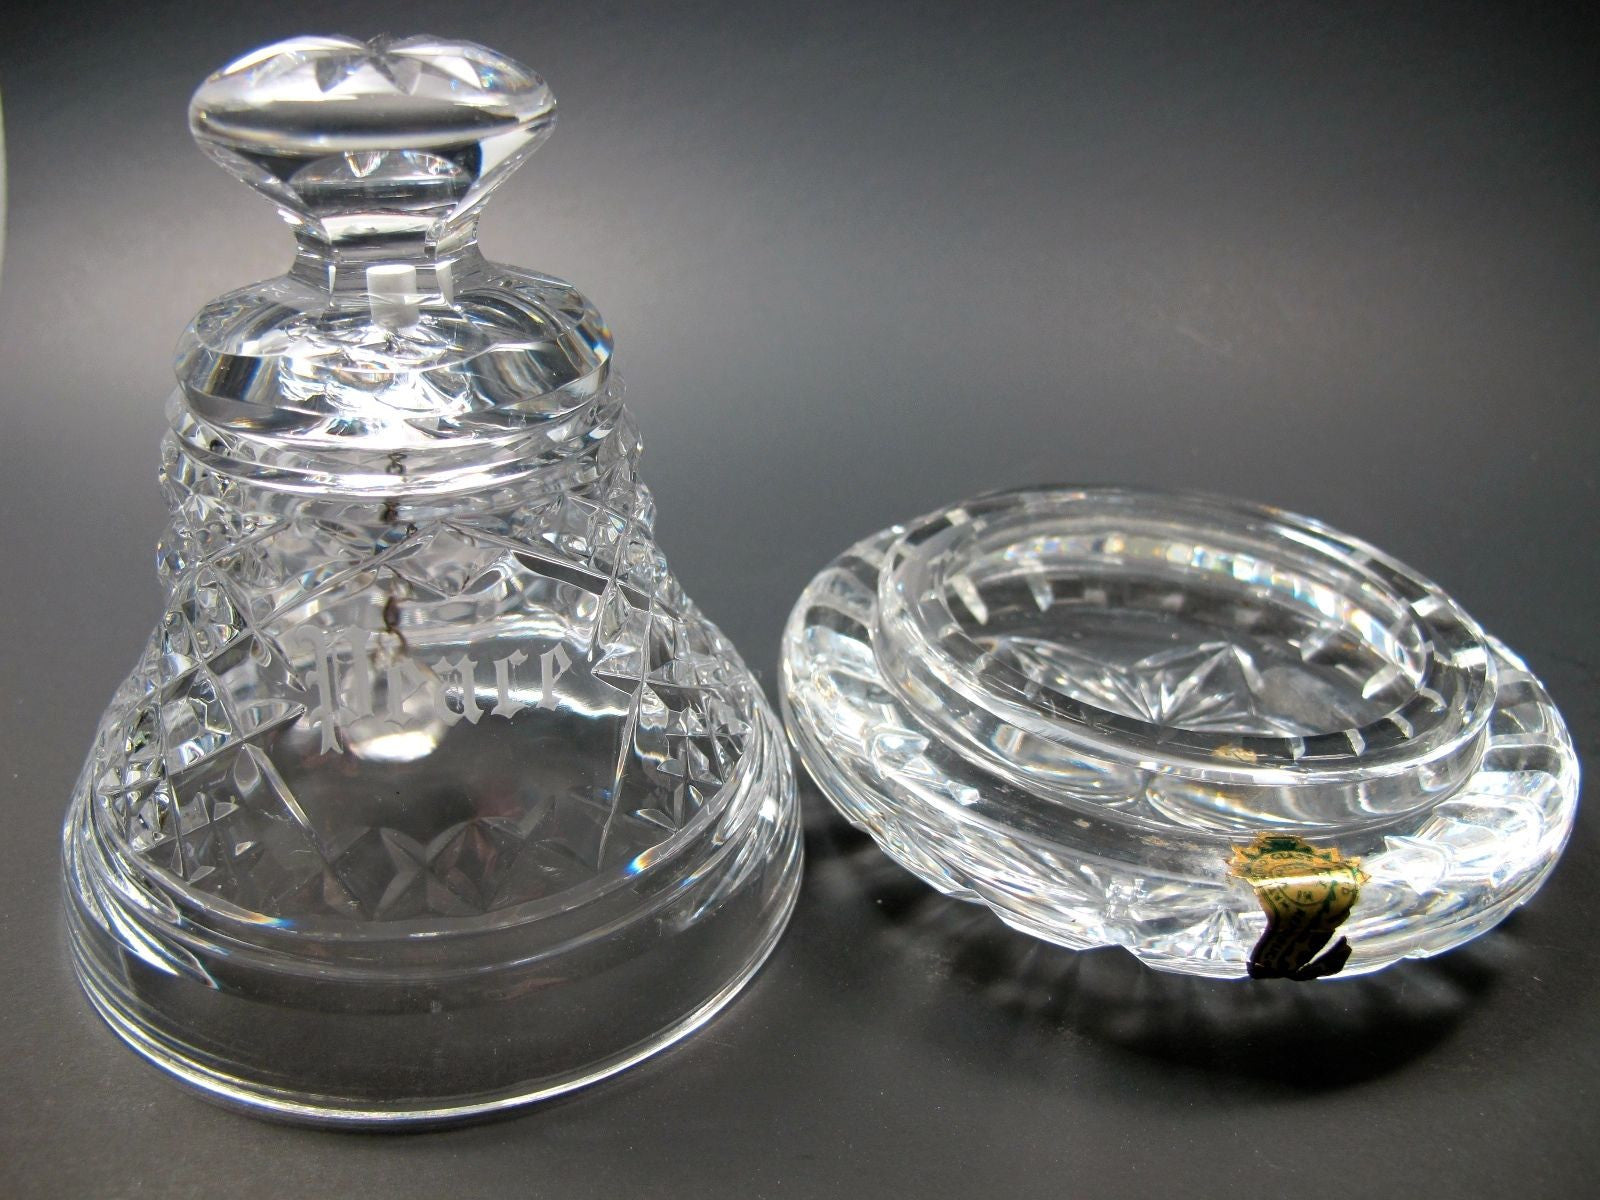 Signed Waterford crystal Peace bell with under dish - O'Rourke crystal awards & gifts abp cut glass